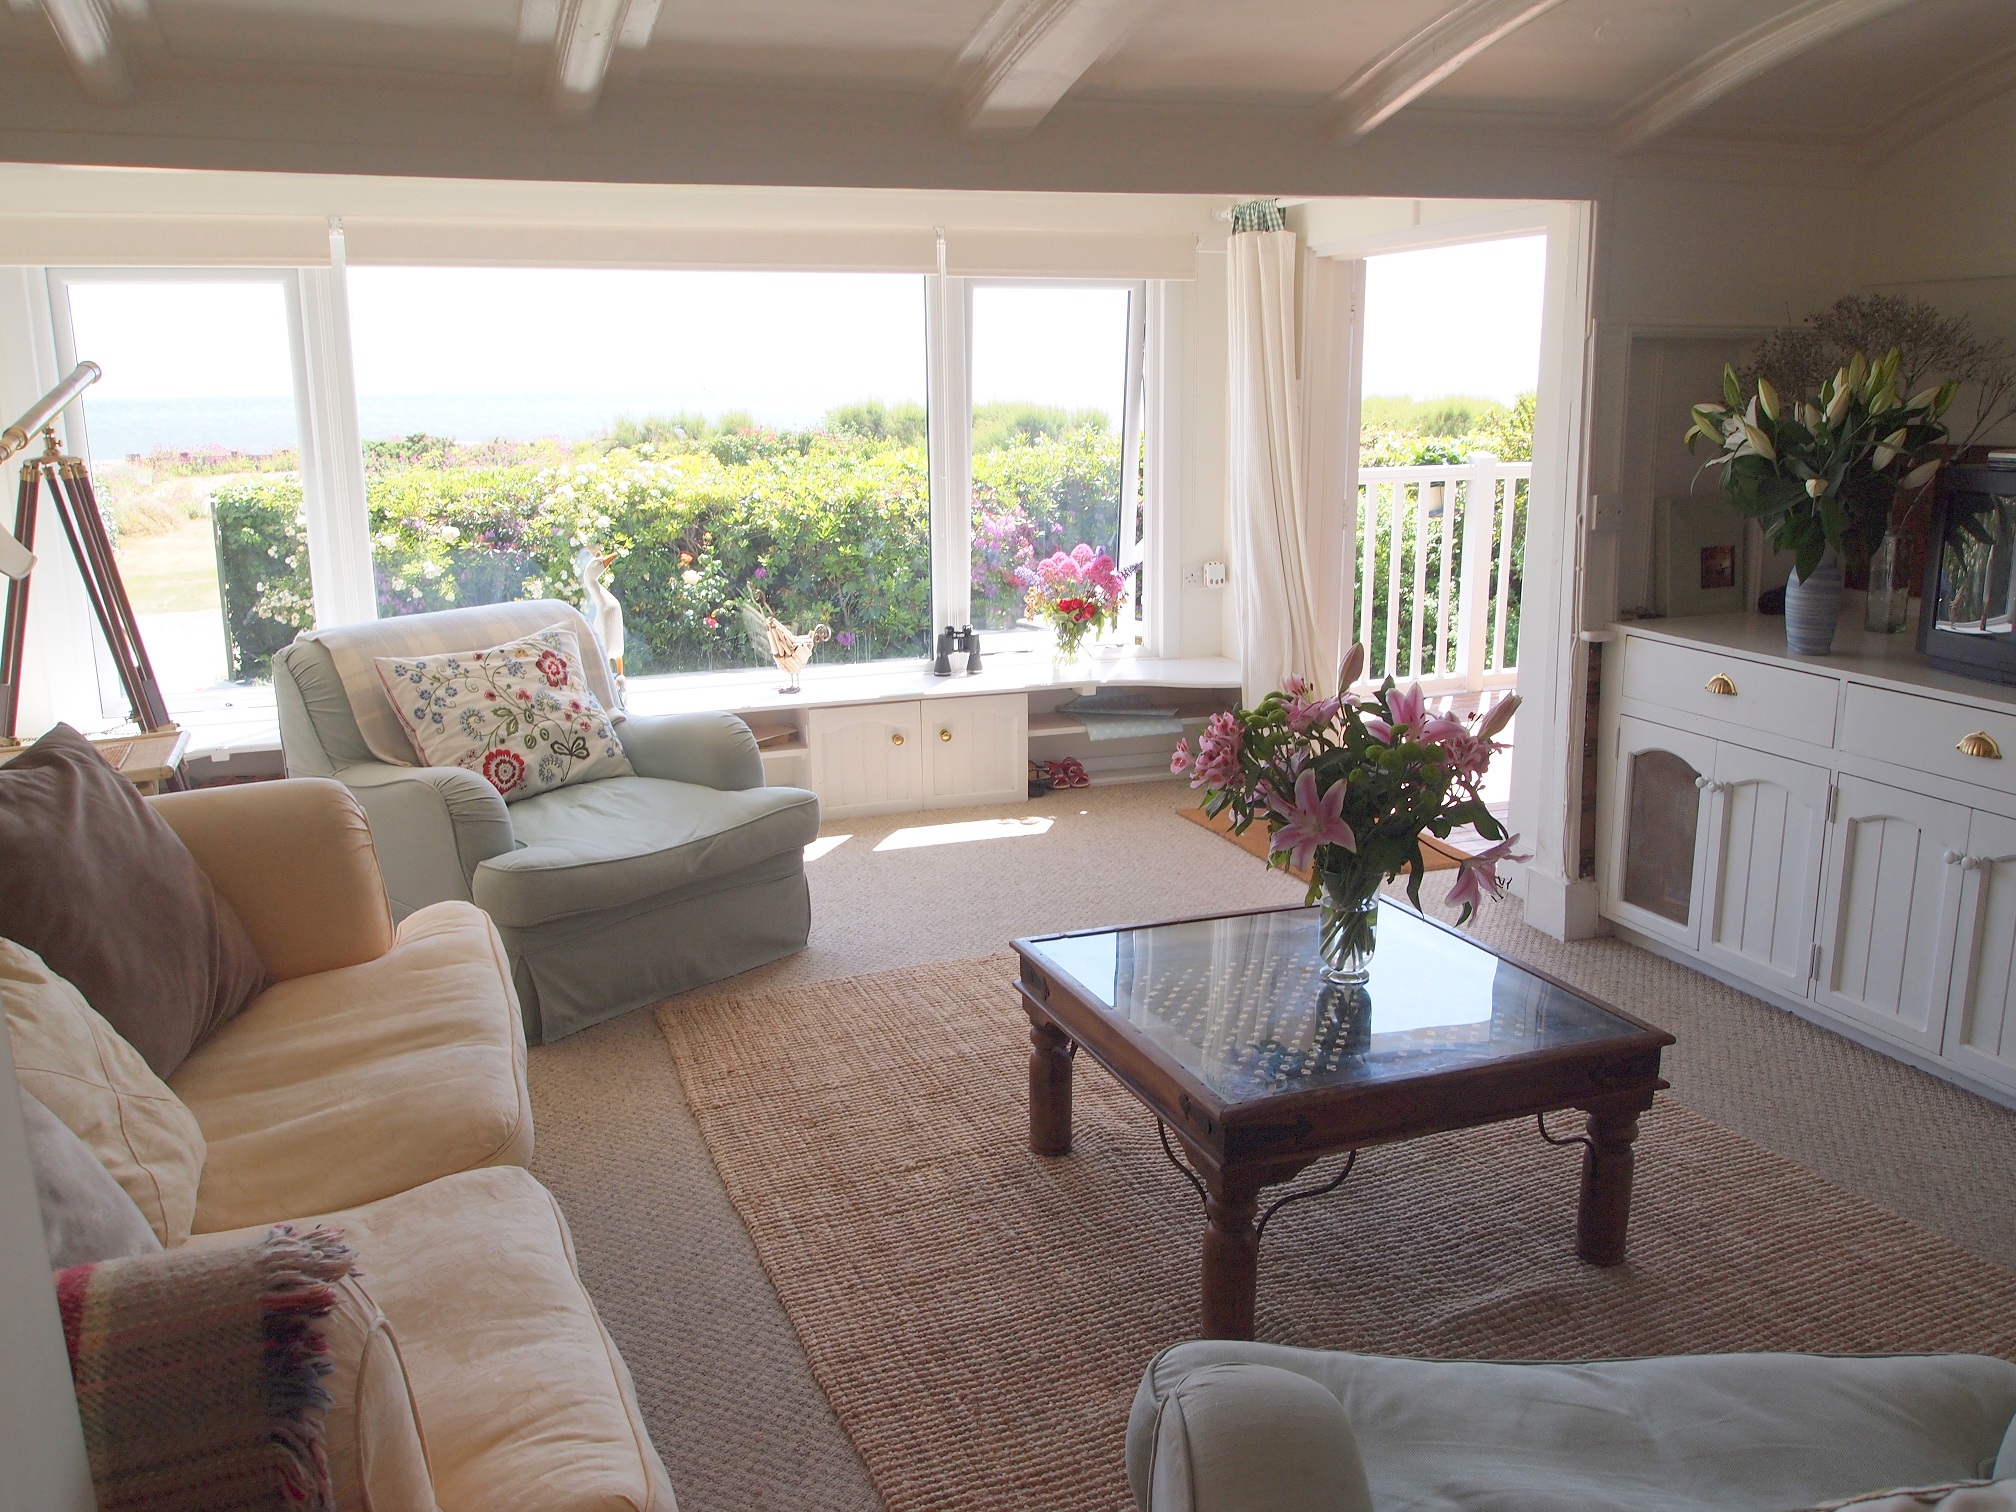 Sitting room with sea view